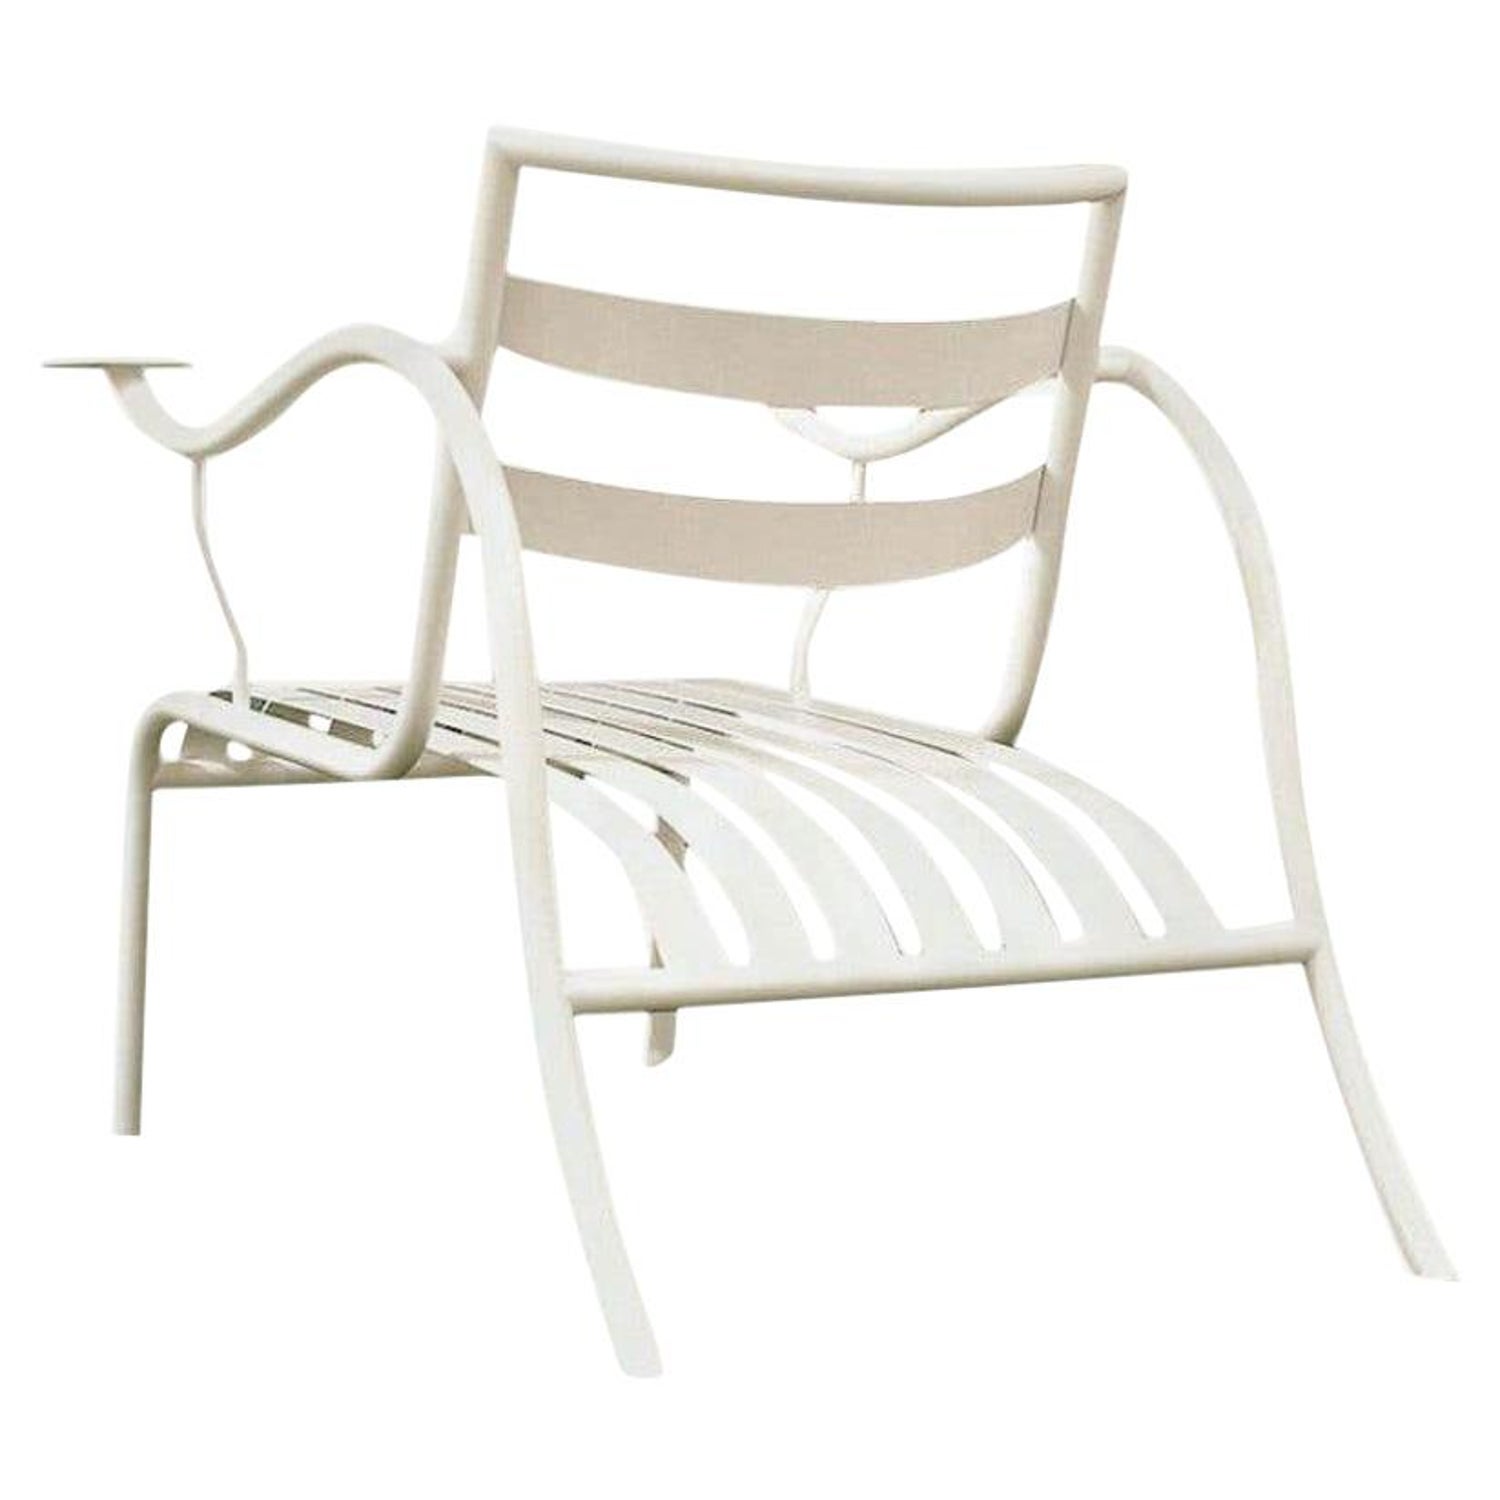 Jasper Morrison Thinking Man's Outdoor Chair in Gypsum White for Cappellini  For Sale at 1stDibs